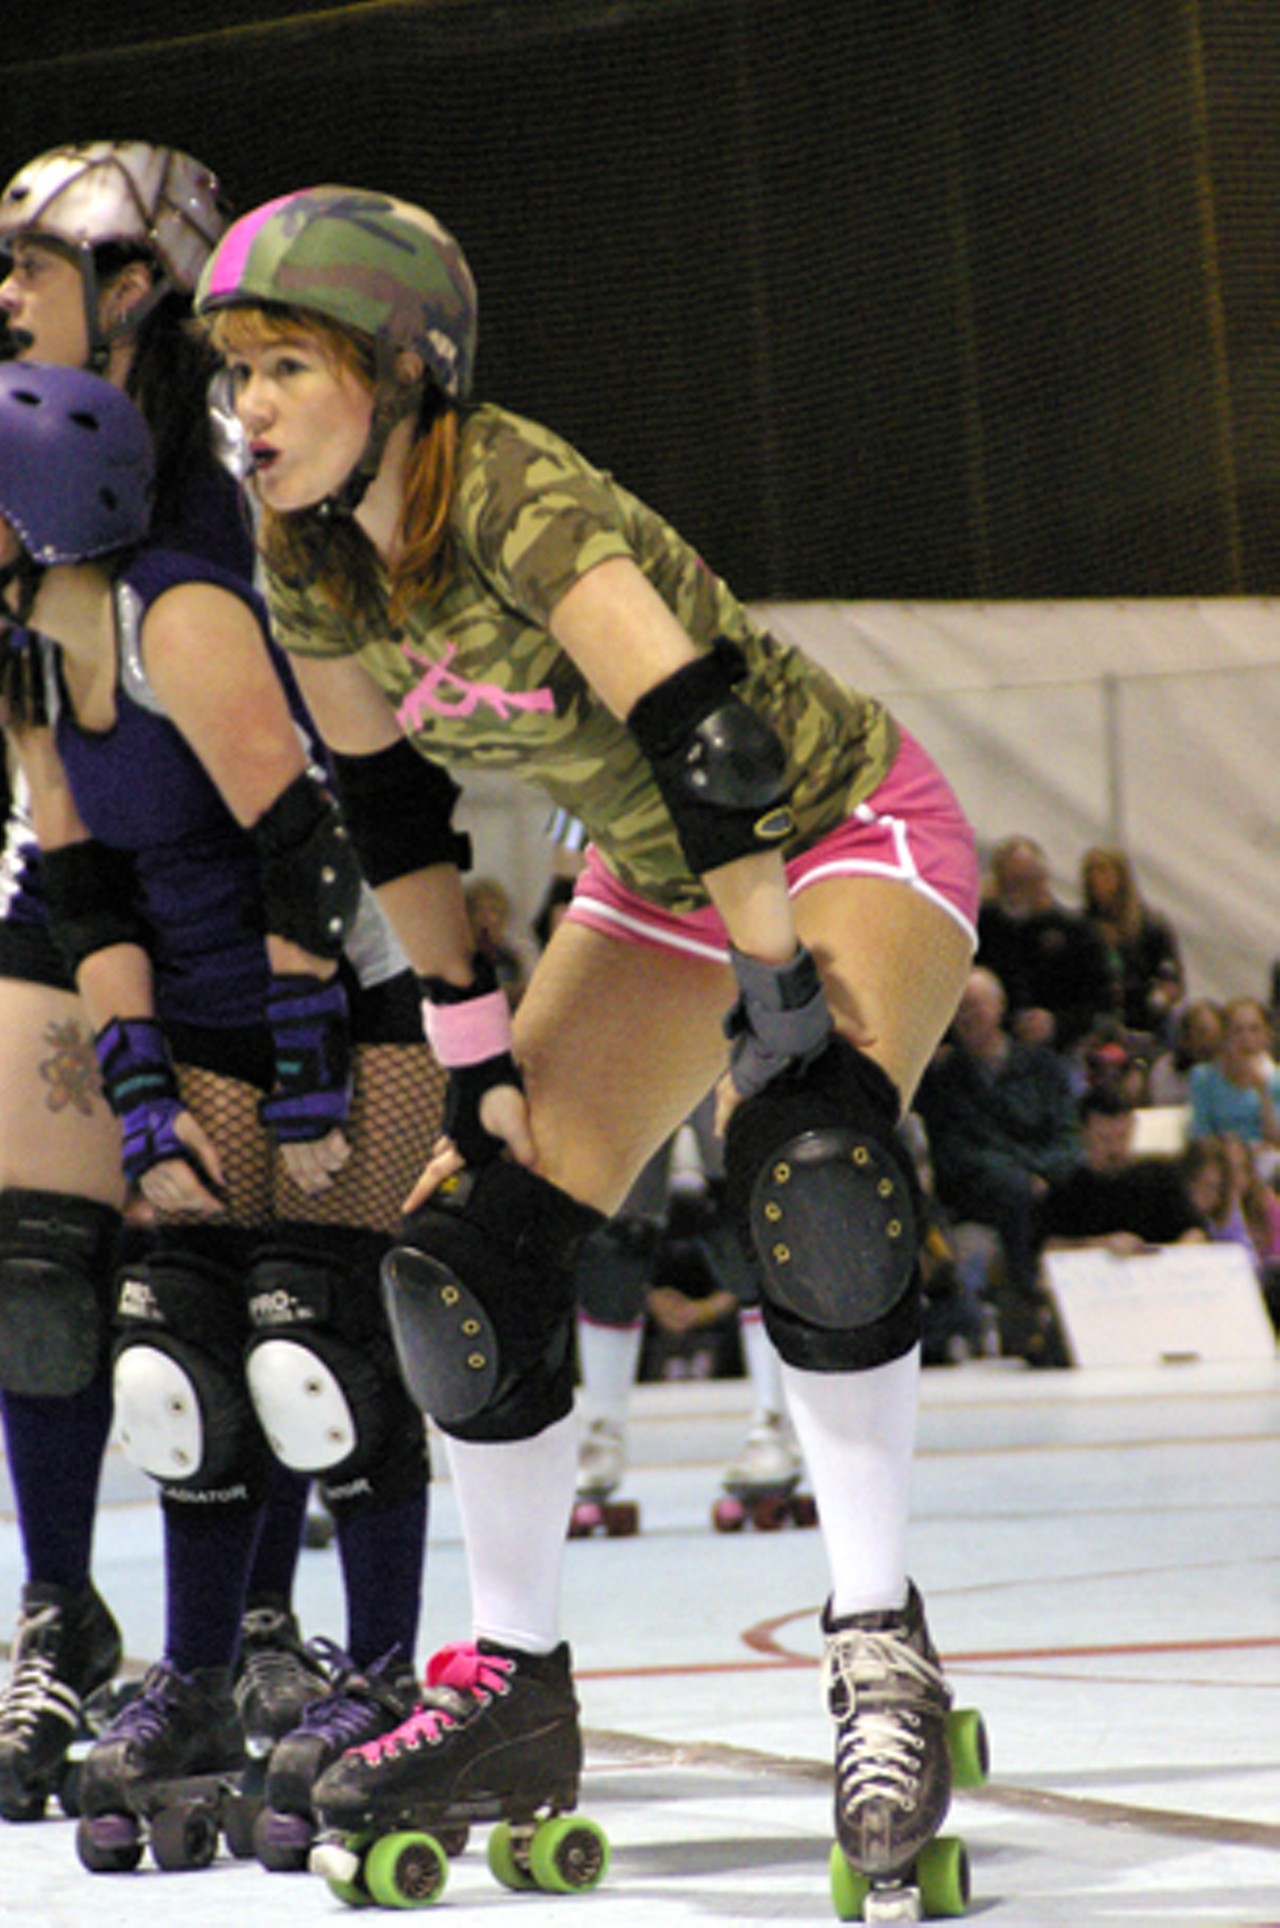 In flat-track roller derby, there are three main positions. &ldquo;Pivots&rdquo; can be recognized by the stripe on their helmets. They control the speed of their team members and serve as the last line of defense against an opposing scorer.